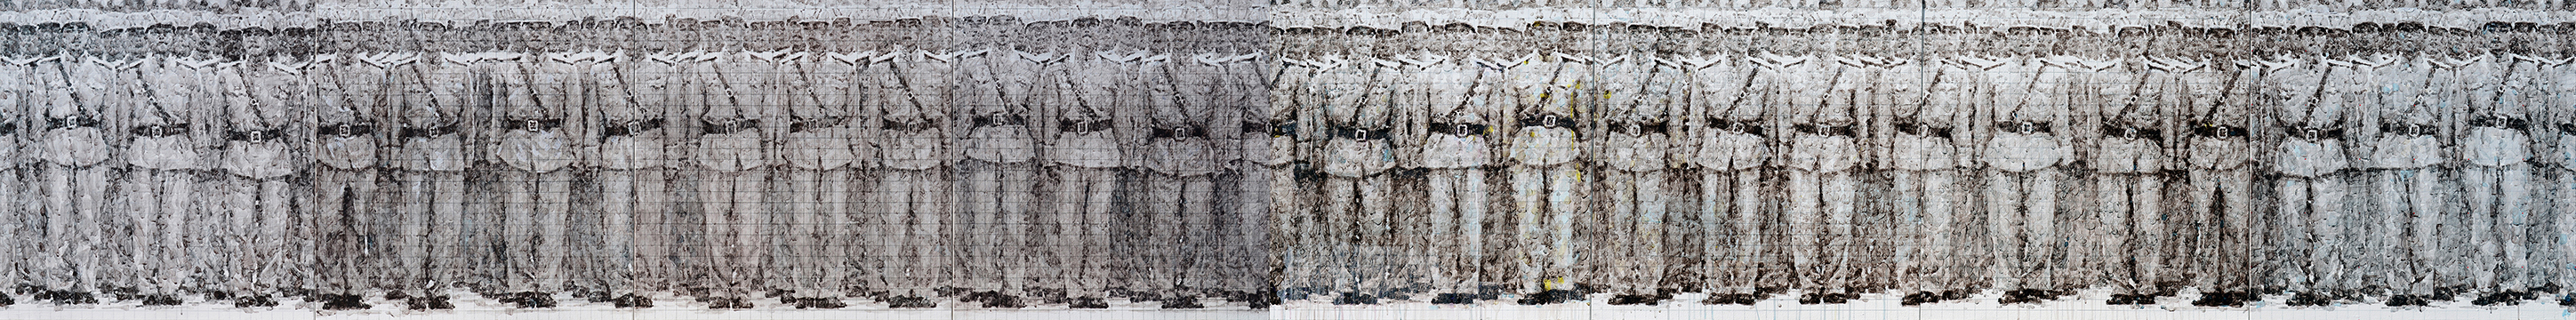 07_jong-kwang-hyun_soldiers-in-uniform-2015-16-acrylic-ink-gloss-varnish-and-gel-mediums-on-canvas-30x240-inches